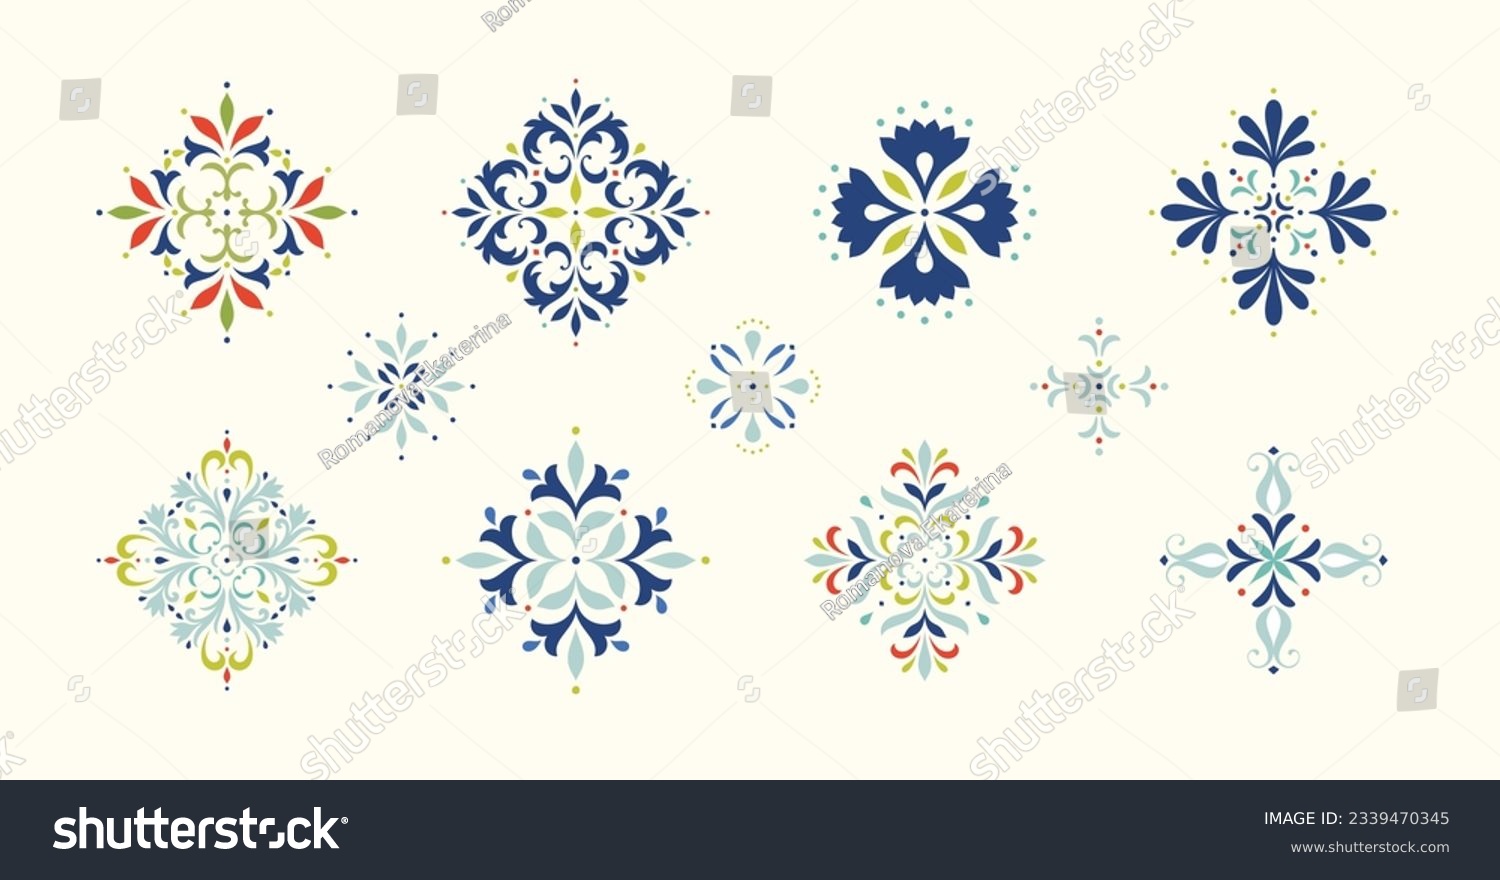 Oriental floral ornament. Damask graphic elements. Imperial rococo decor. For seamless patterns, wrapping paper, greeting and business cards, wedding invitations, textile, t-shirt prints etc. #2339470345